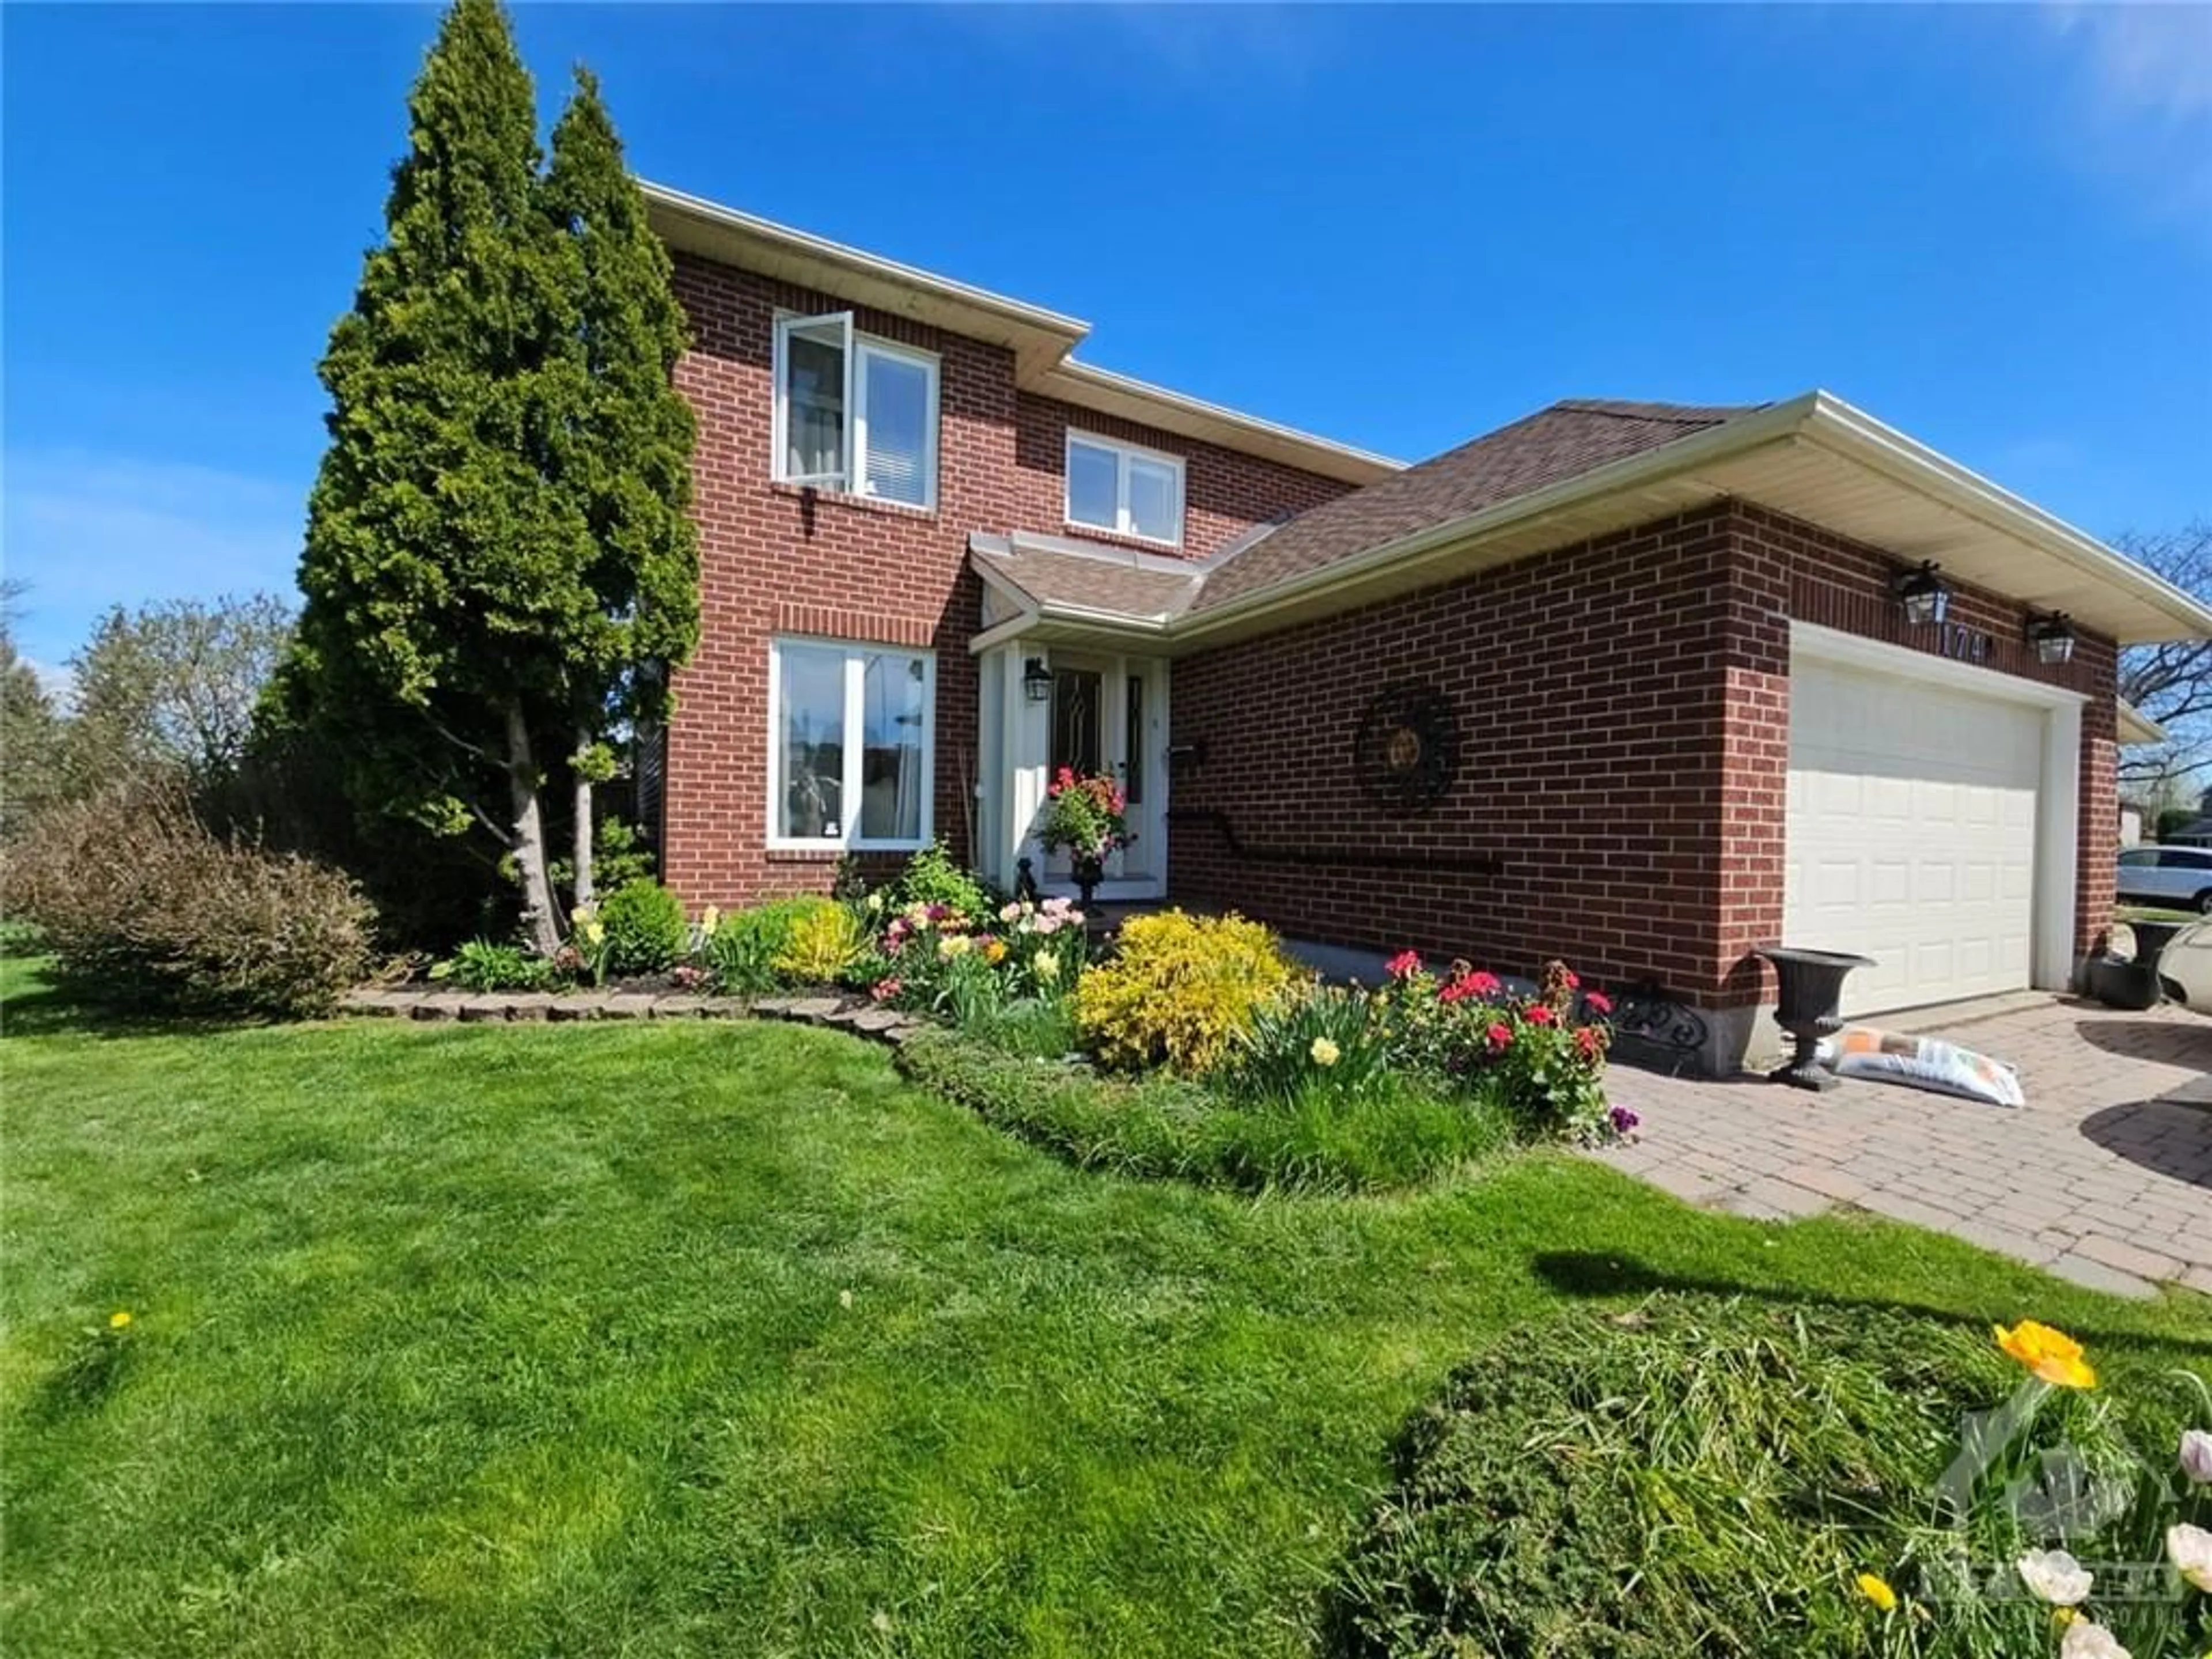 Home with brick exterior material for 1749 TEAKDALE Ave, Ottawa Ontario K1C 6M2